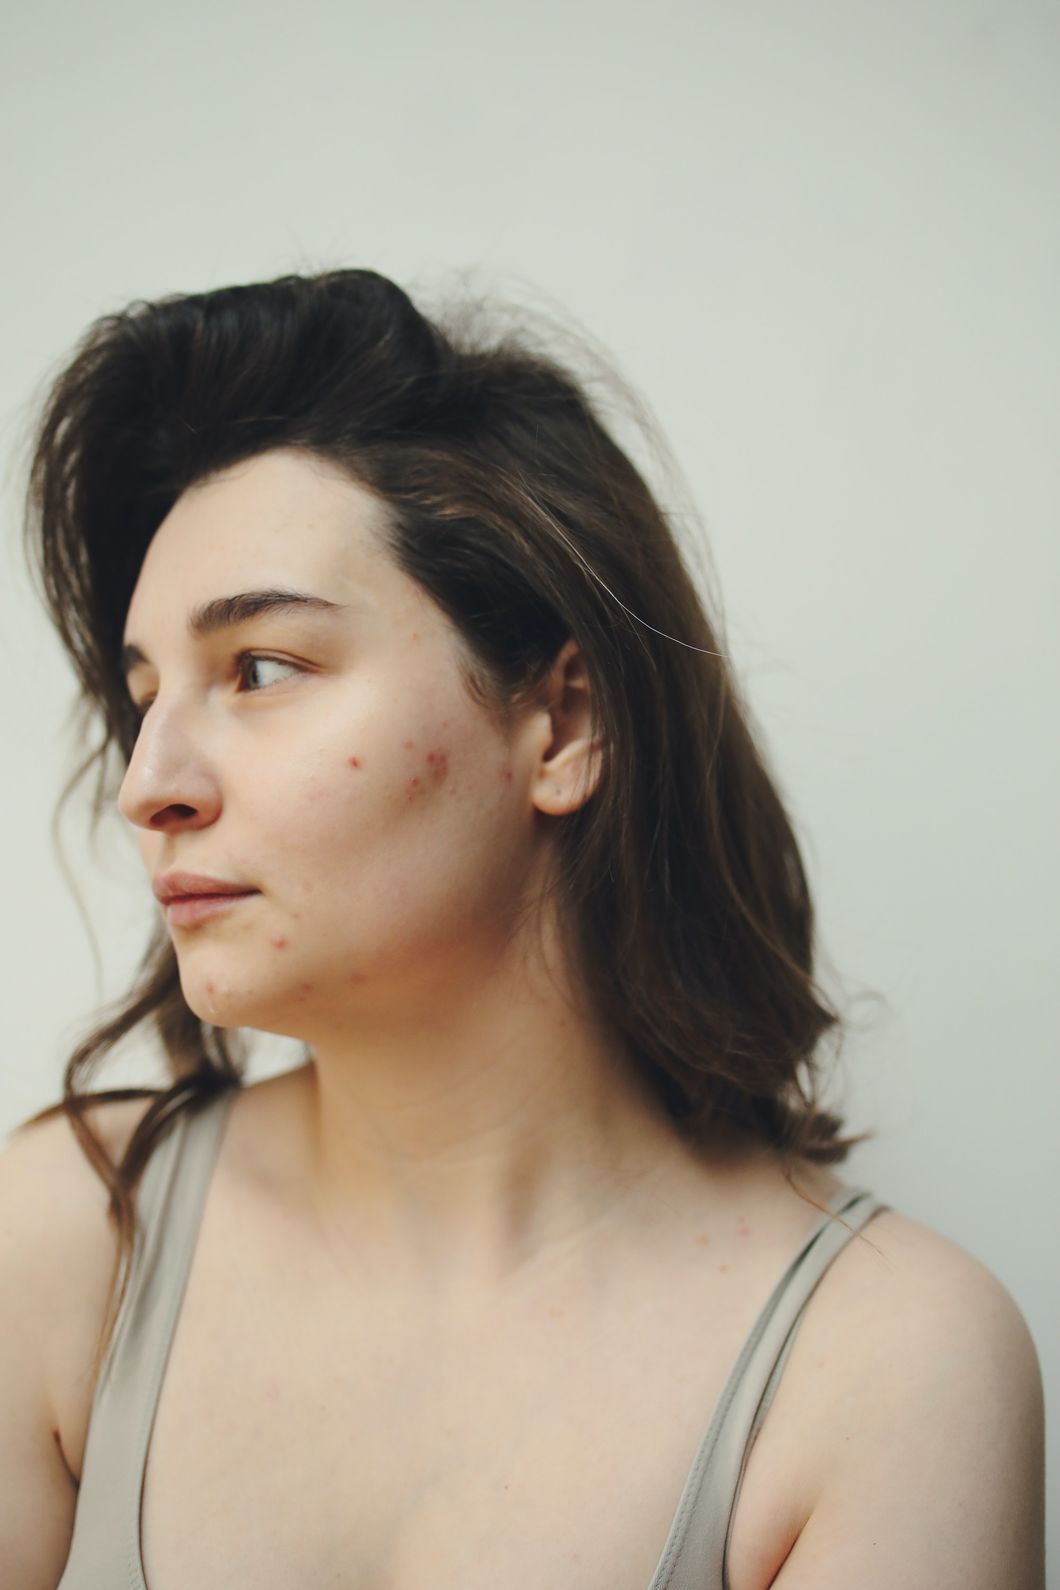 I've Struggled With Acne My Whole Life, And I'm Finally Learning To Embrace It